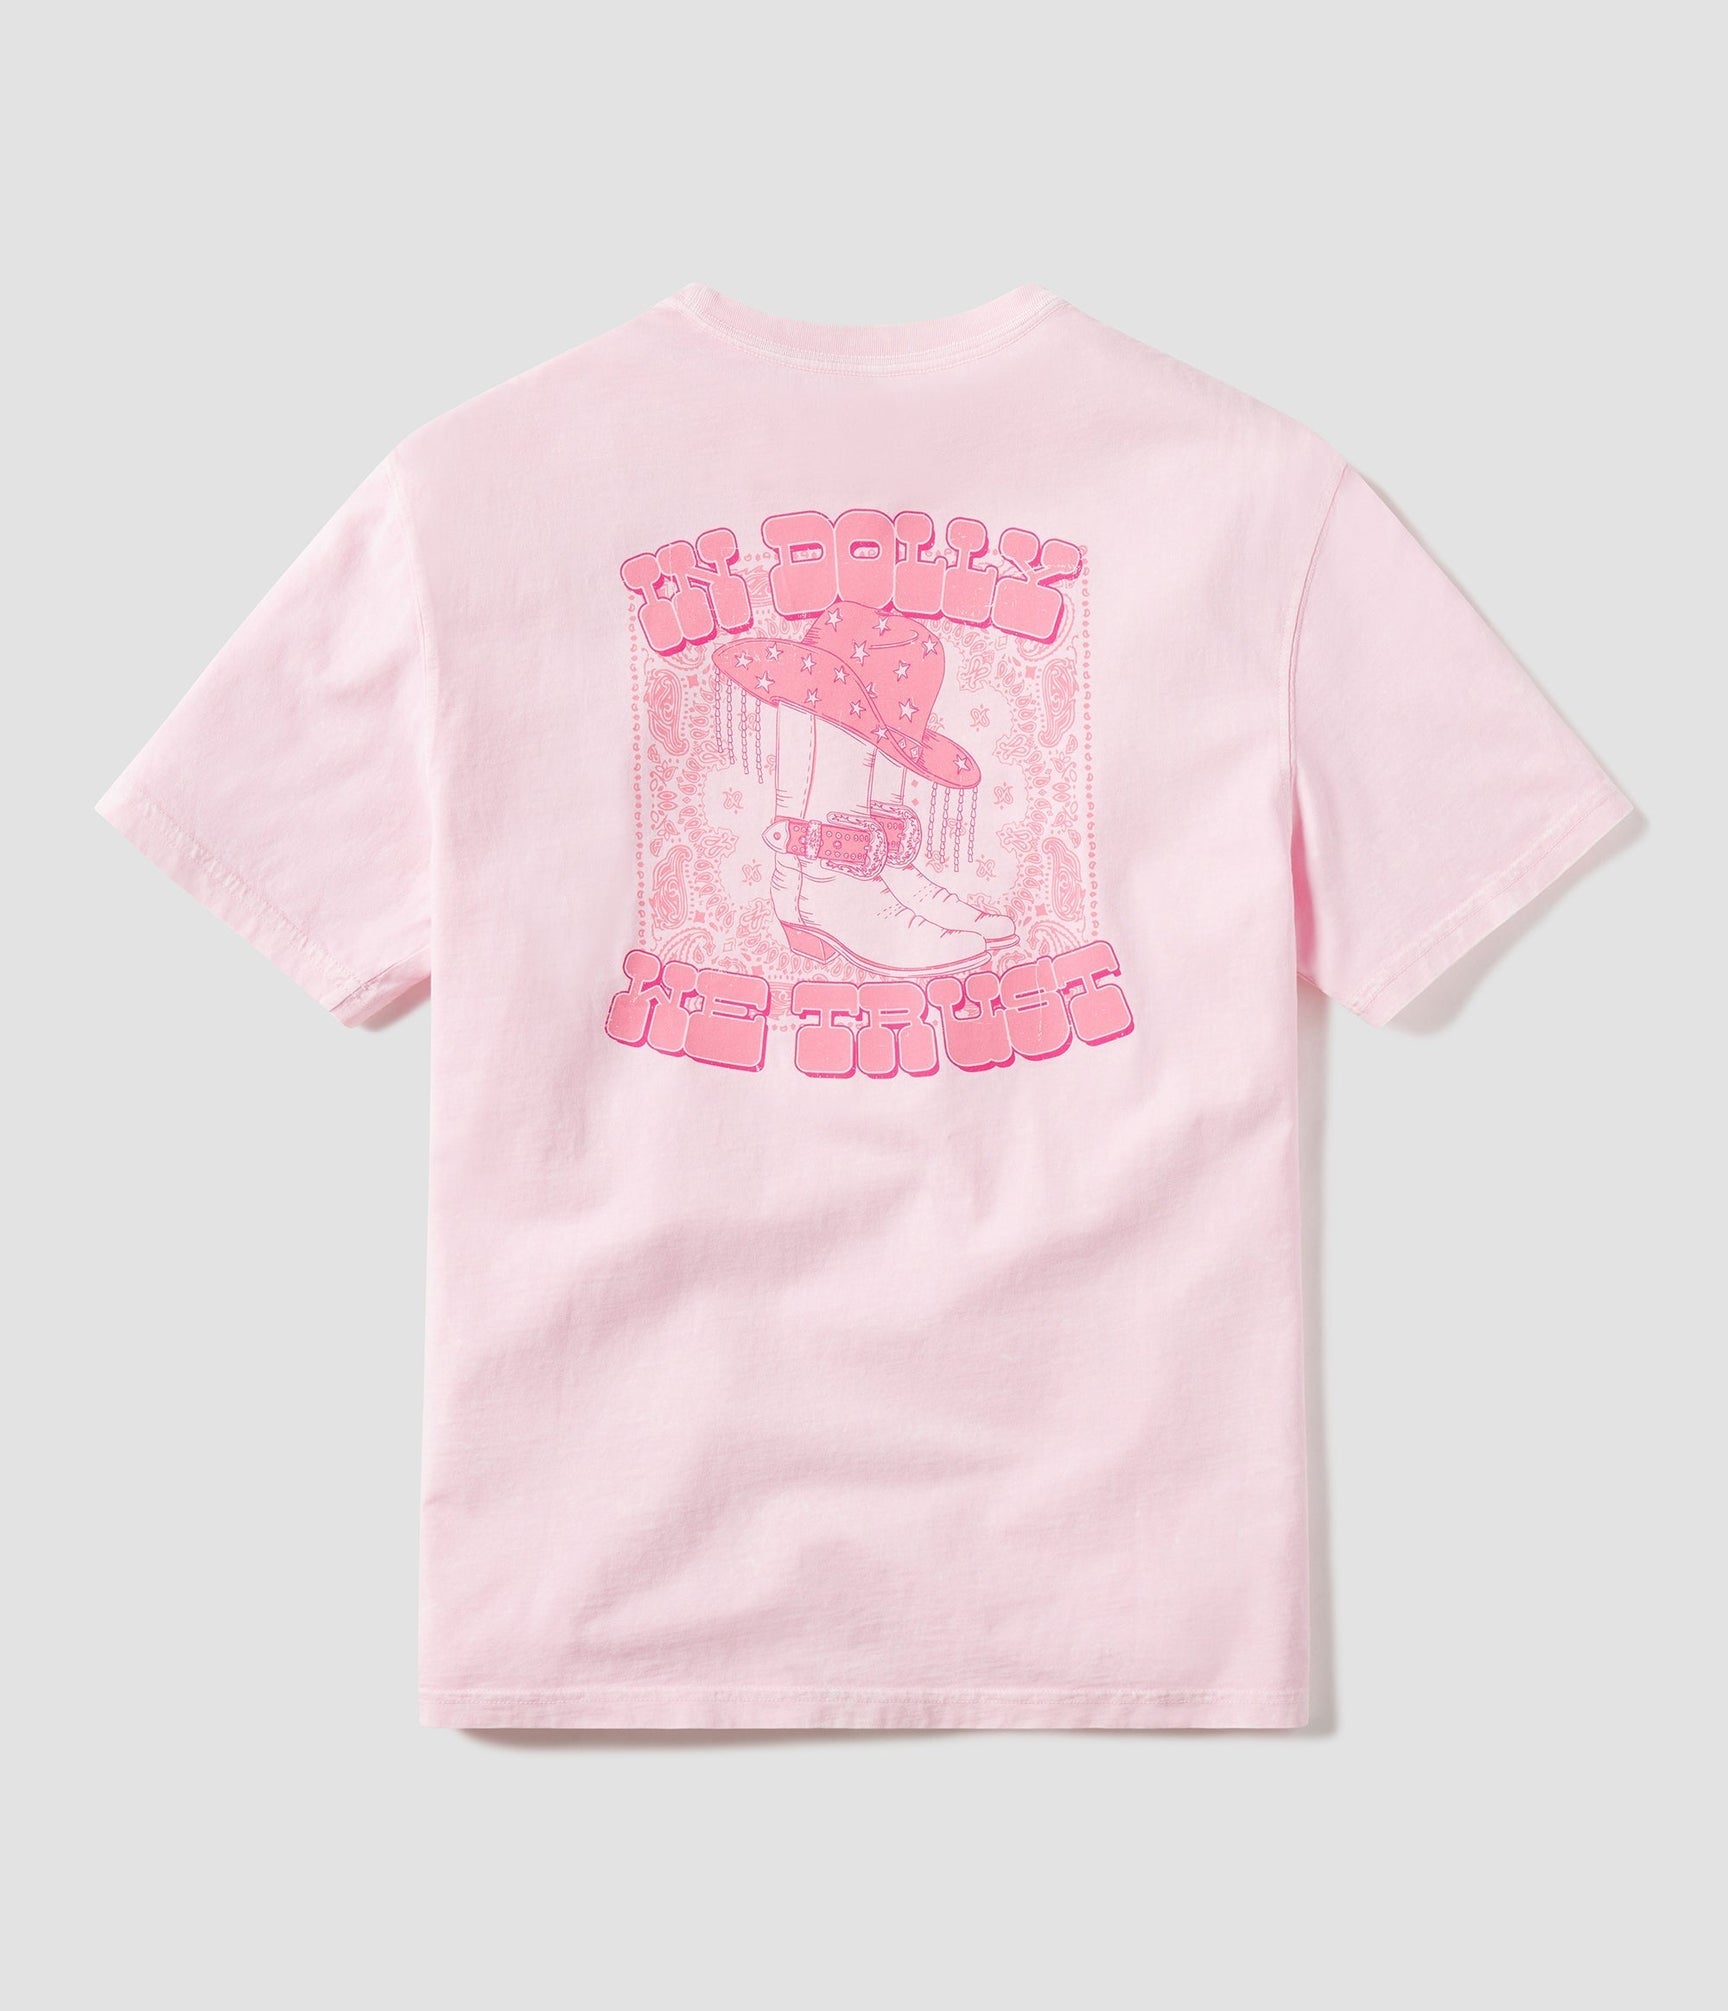 Southern Shirt Women's Hello Dolly Tee in pink.